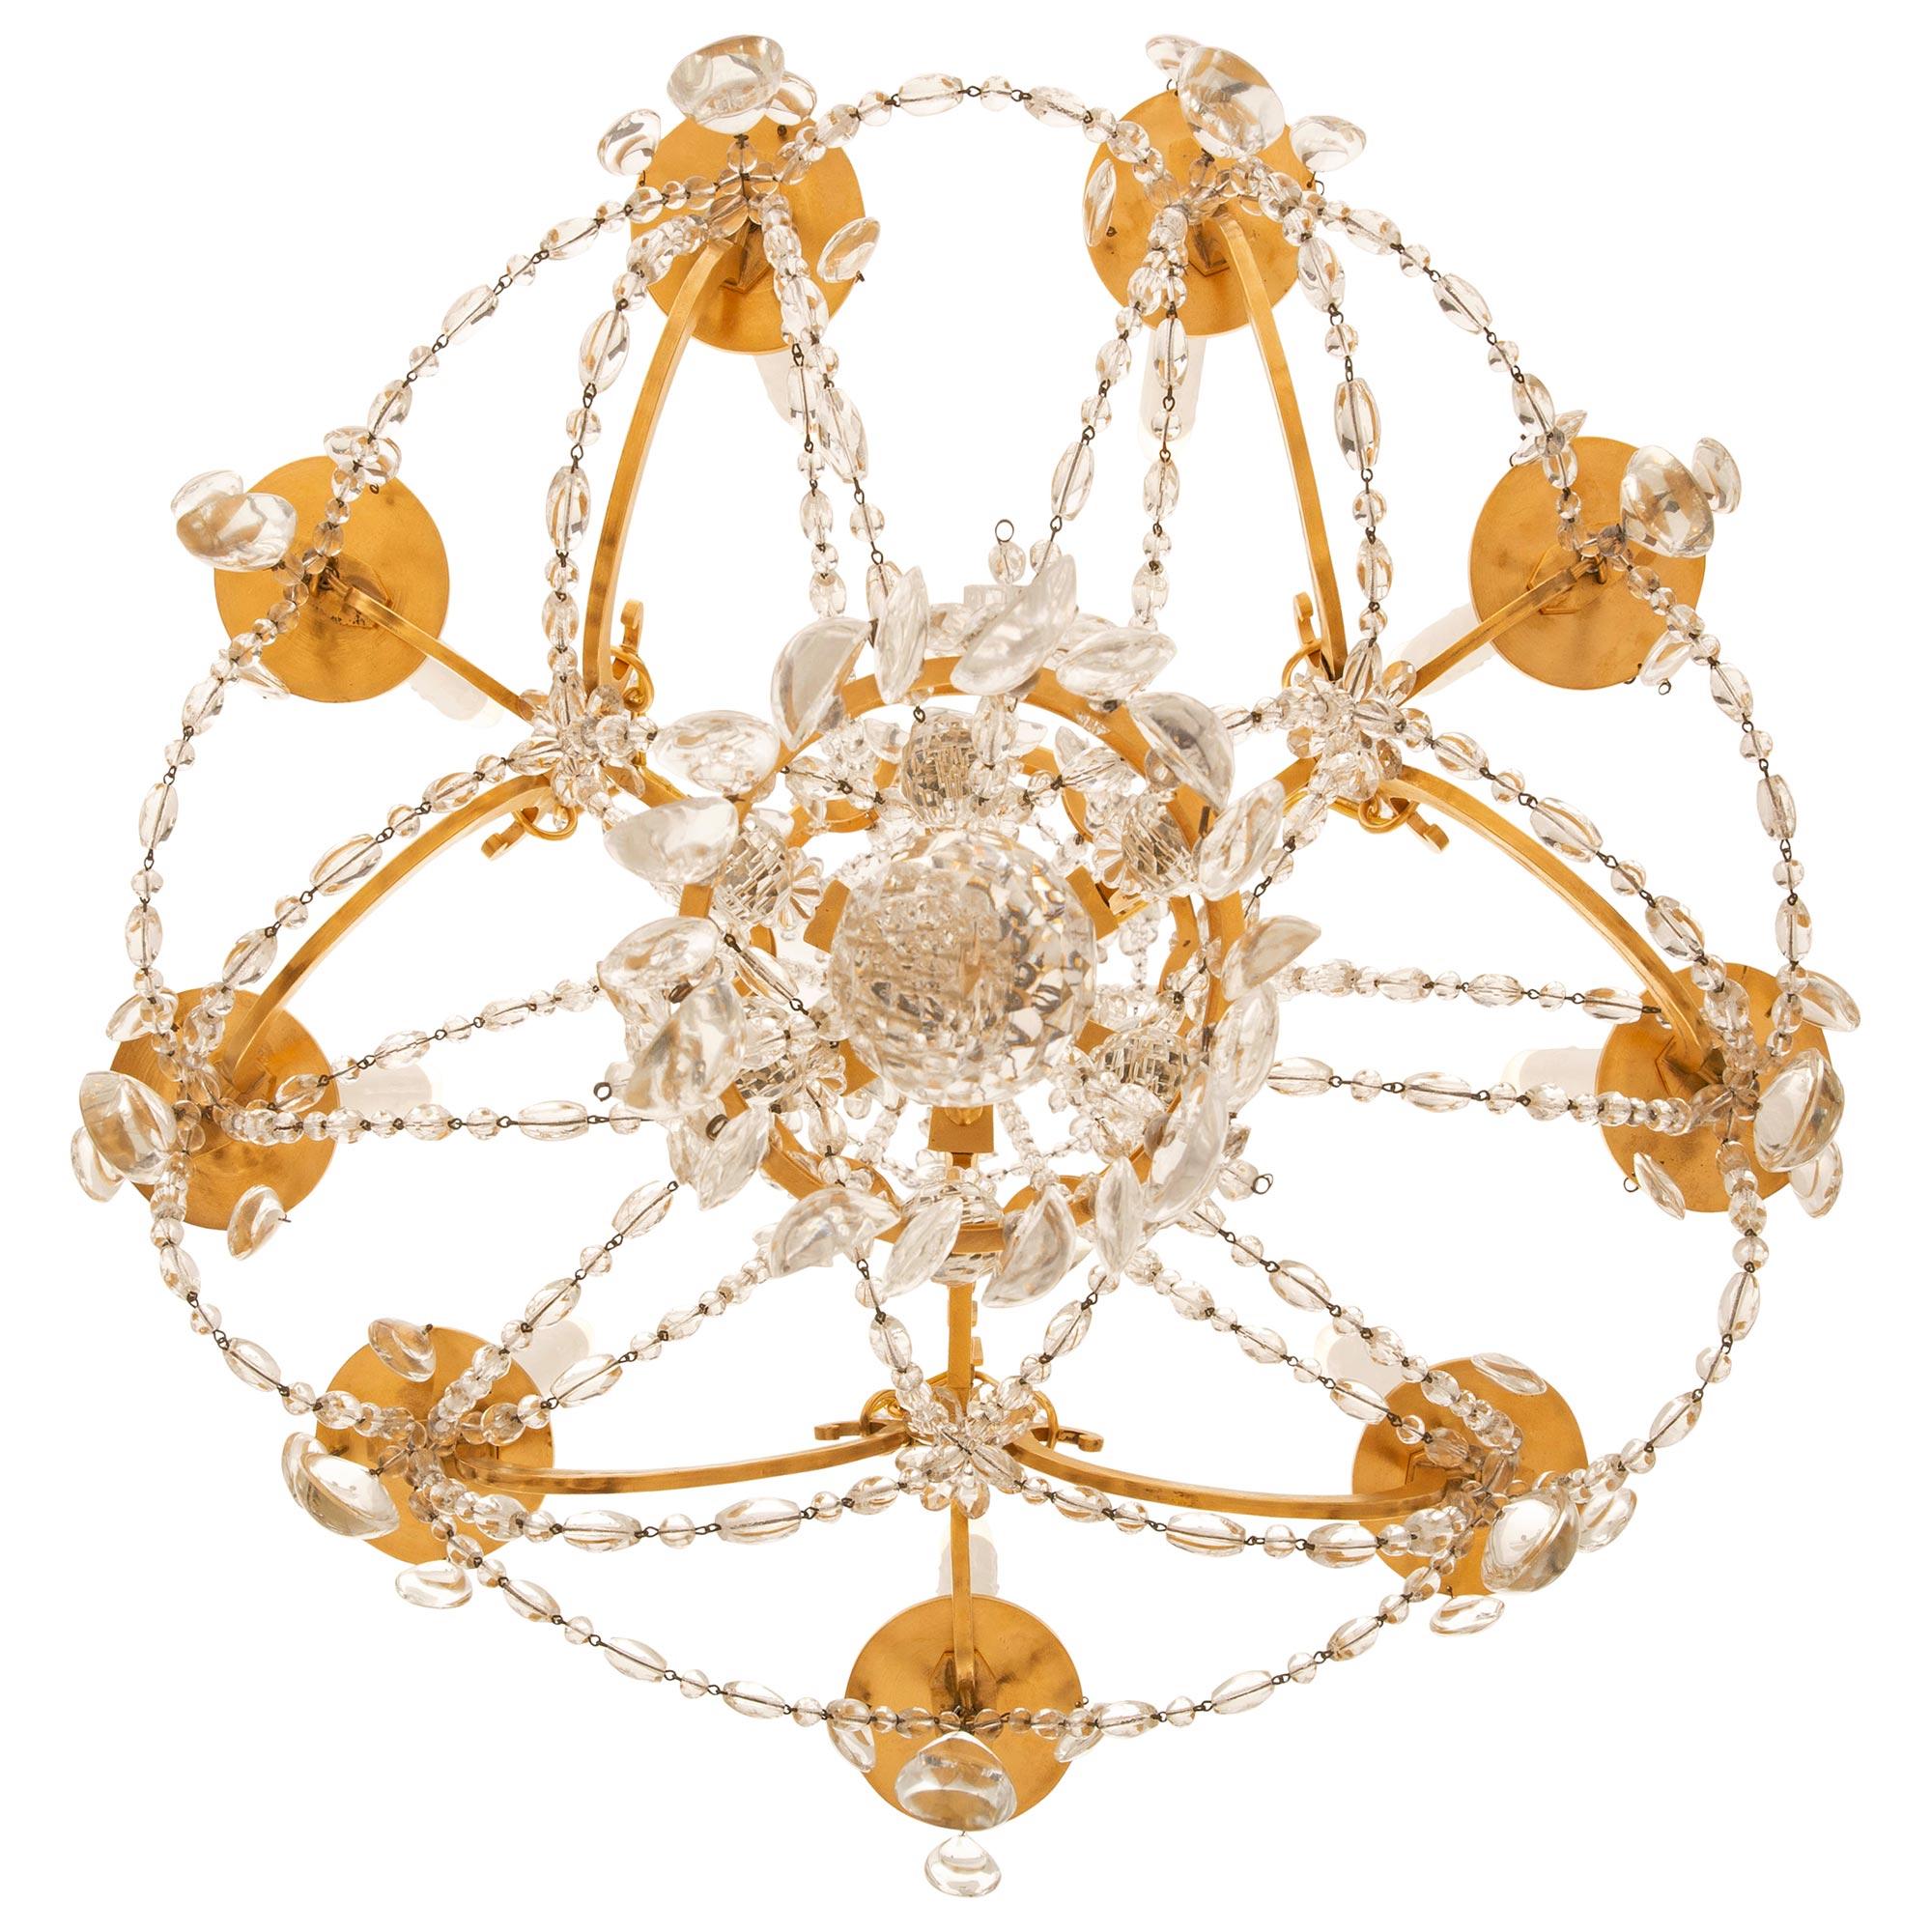 A stunning French 19th century Louis XVI st. Ormolu and Baccarat Marie Antoinette chandelier. This nine arm Marie Antoinette style chandelier is centered by a spectacularly cut Baccarat Crystal ball surrounded by a ring of tear drop shaped Crystals